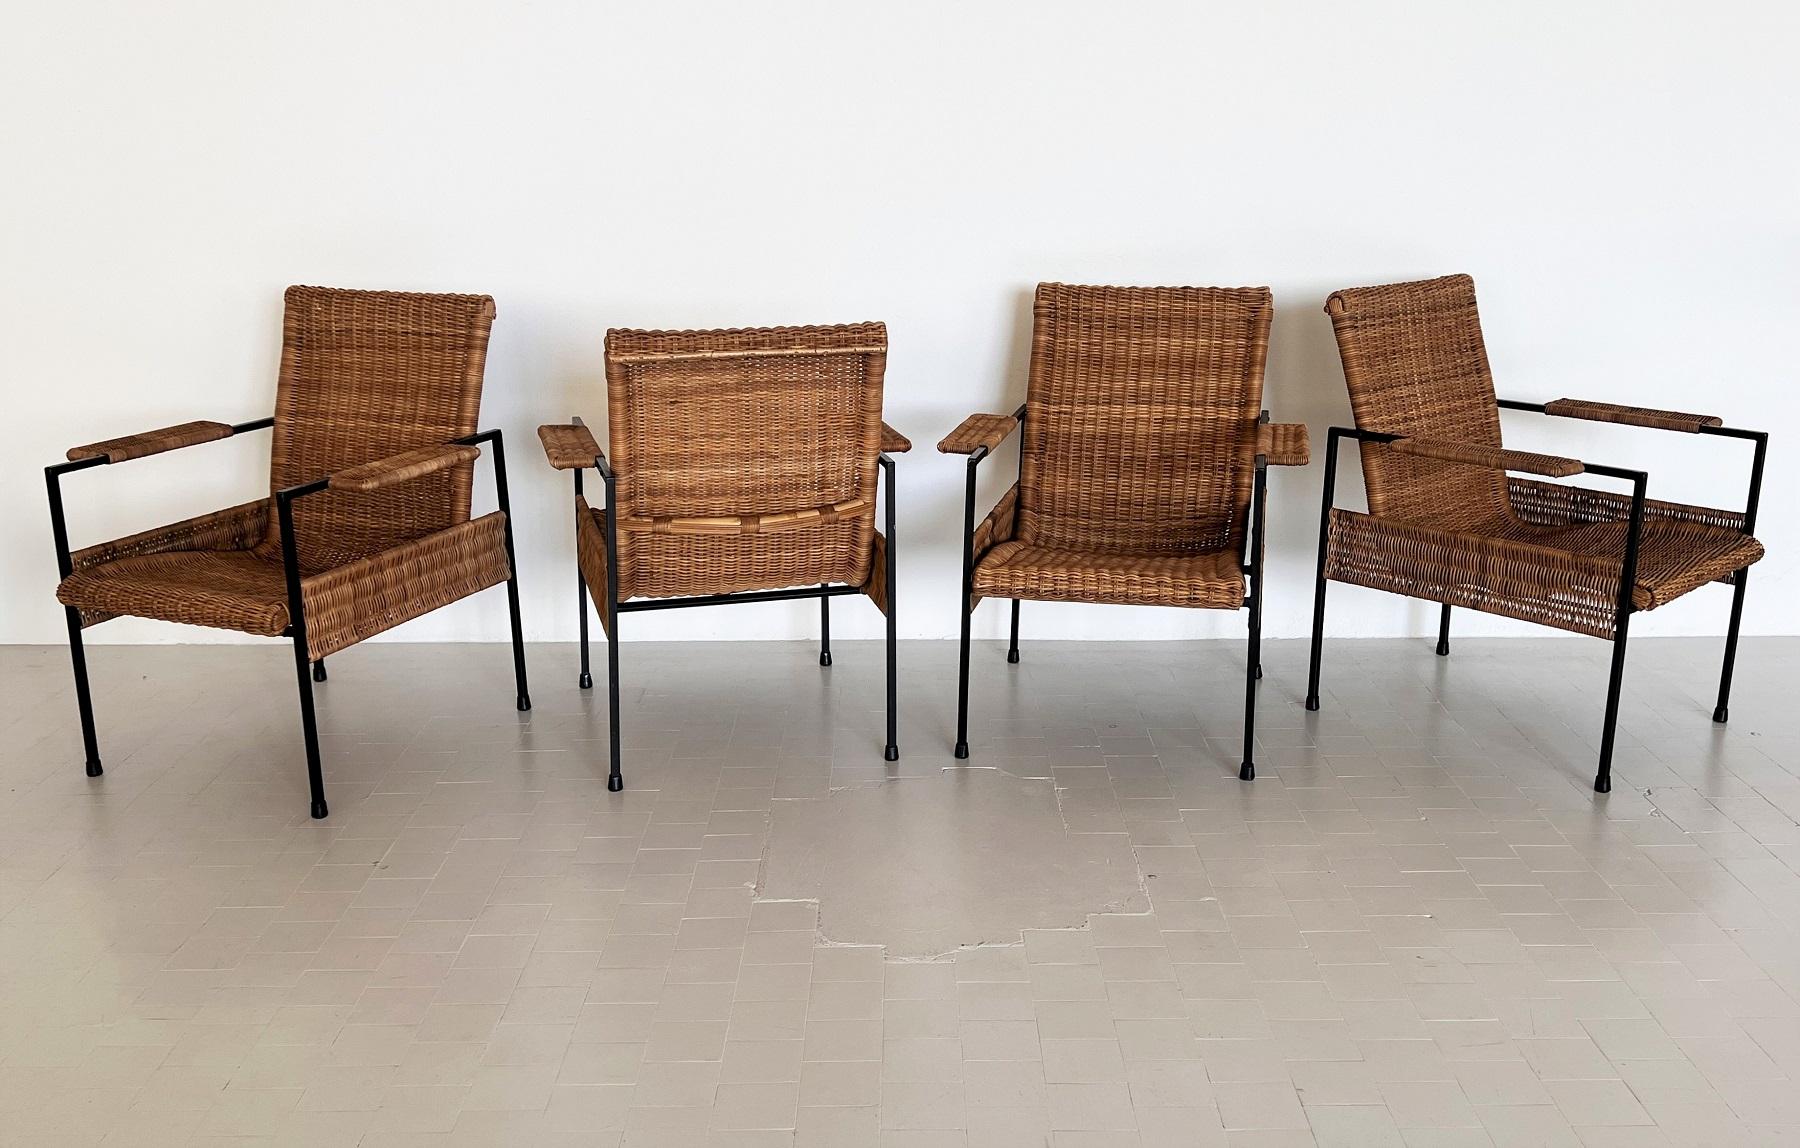 Cozy and very comfortable lounge chairs with generous big seat.
Made in the 1960s in Italy.
The complete curvy seat and backrest is made of handmade wicker-rattan and in overall very good condition with very small signs of use.
The armrests are also